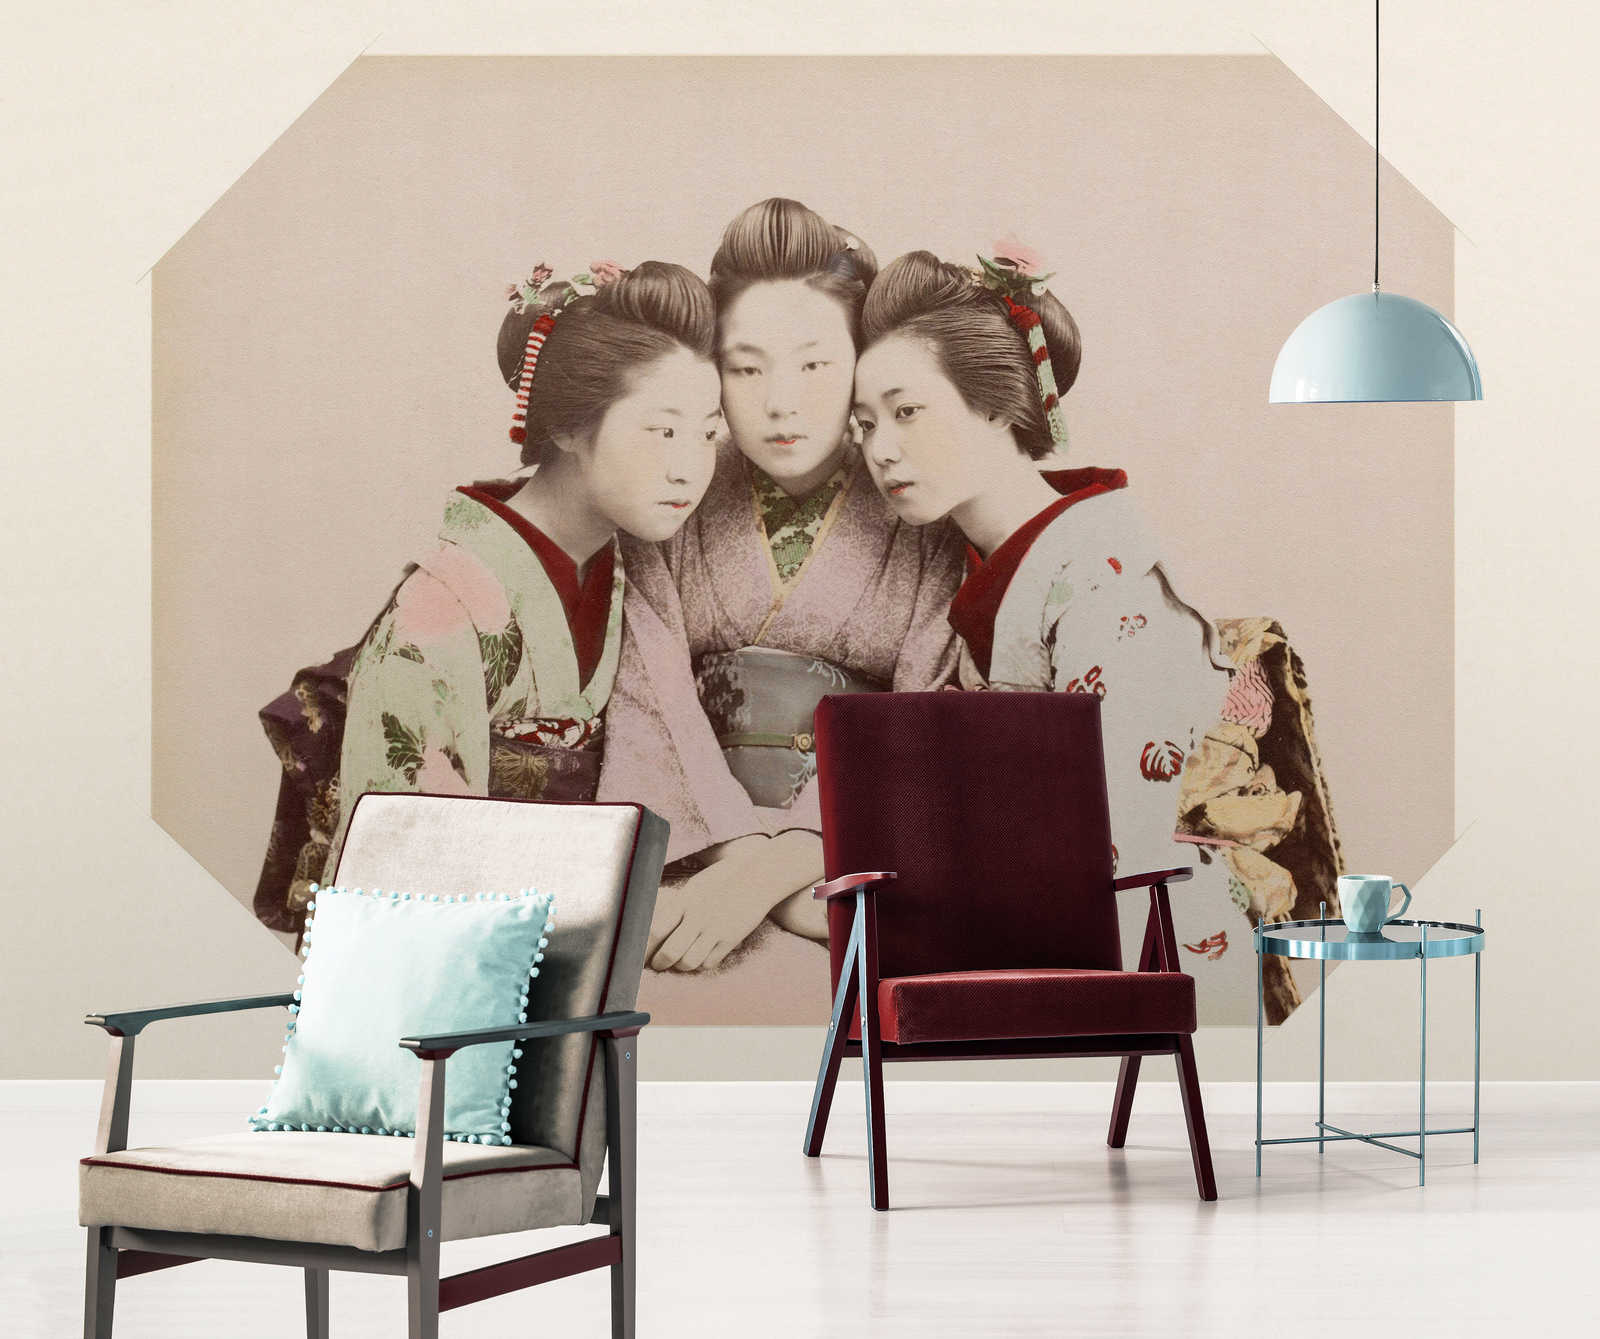             Kyoto 1 - Vintage Geisha Portrait mural with picture frame
        